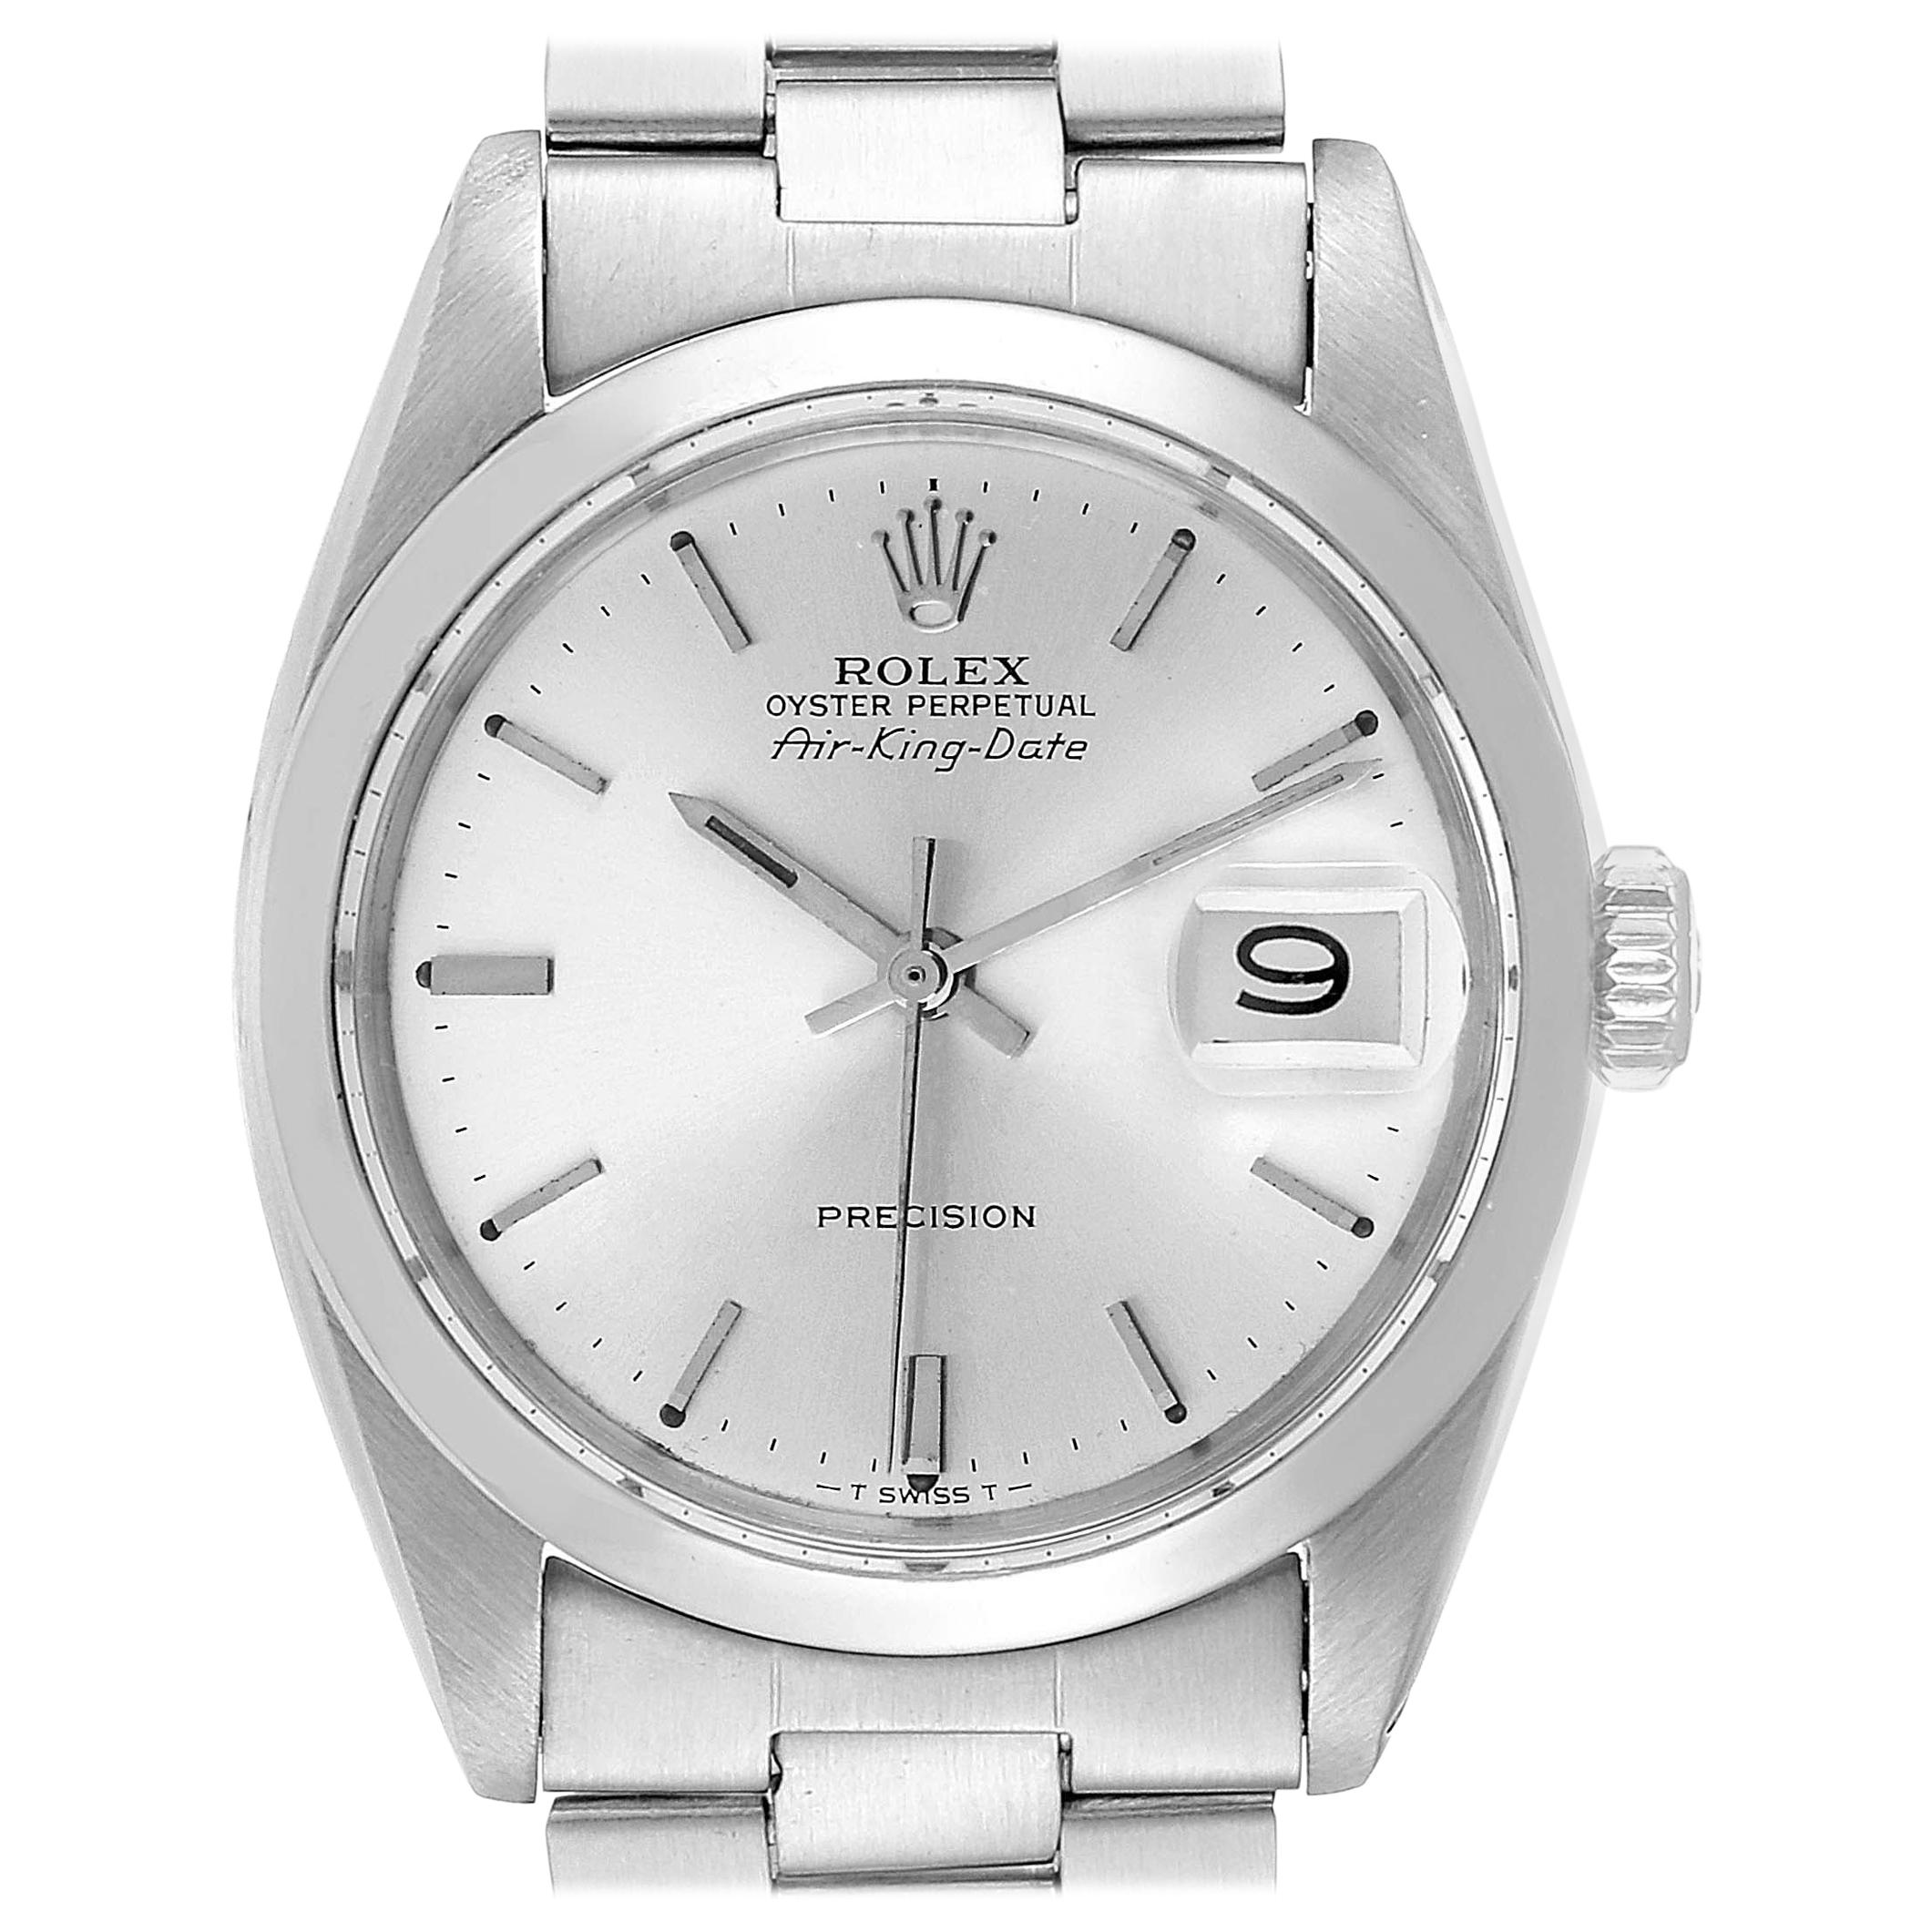 Rolex Air King Date Vintage Stainless Steel Silver Dial Men’s Watch 5700 For Sale